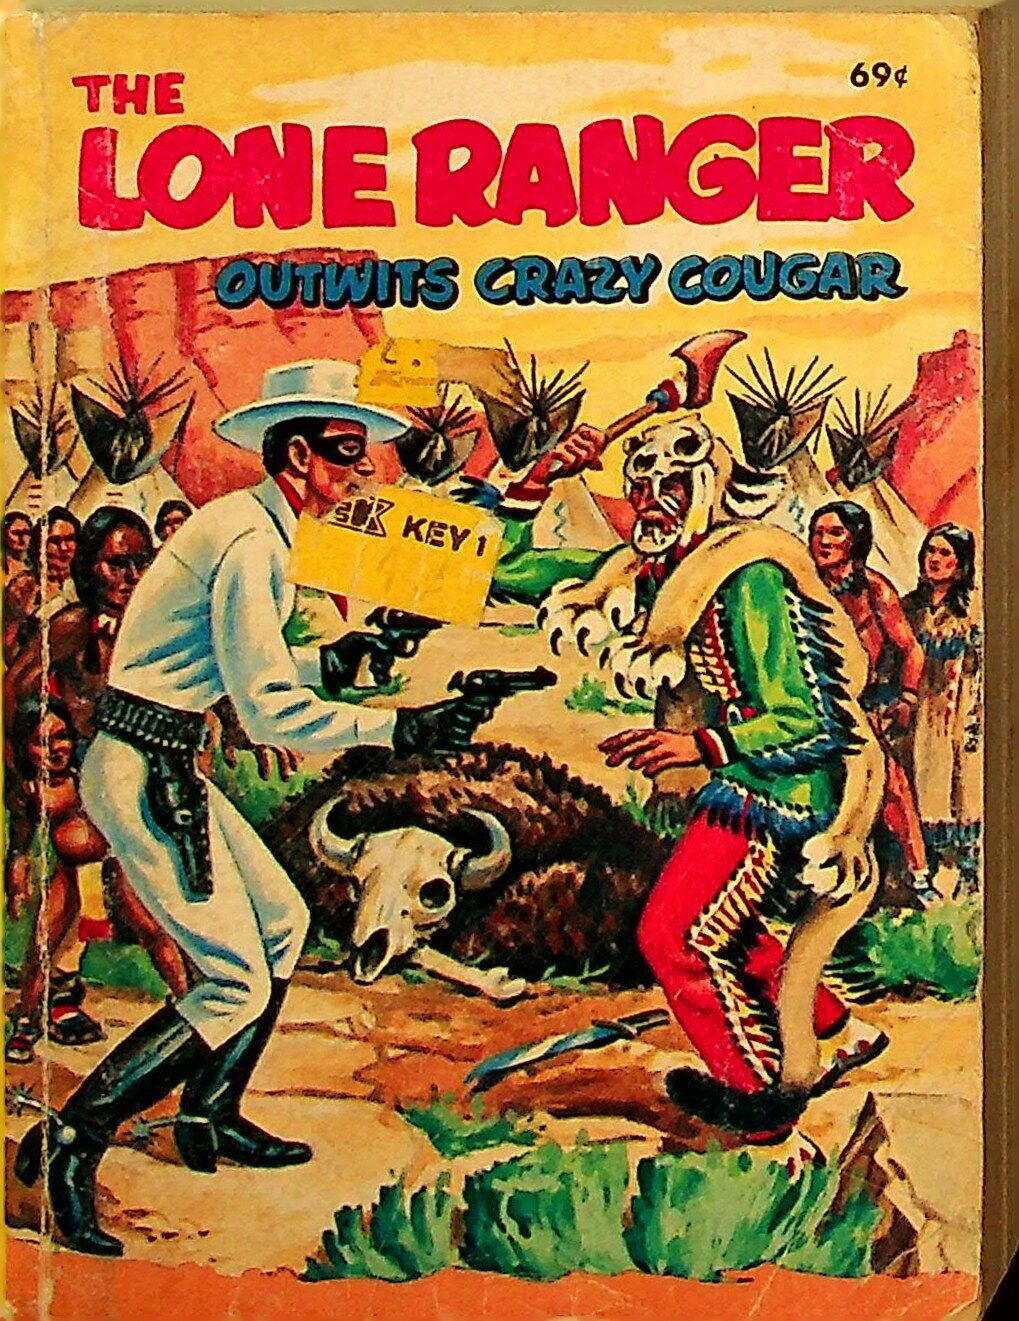 Lone Ranger Outwits Crazy Cougar #5774-1 VG 1979 Low Grade